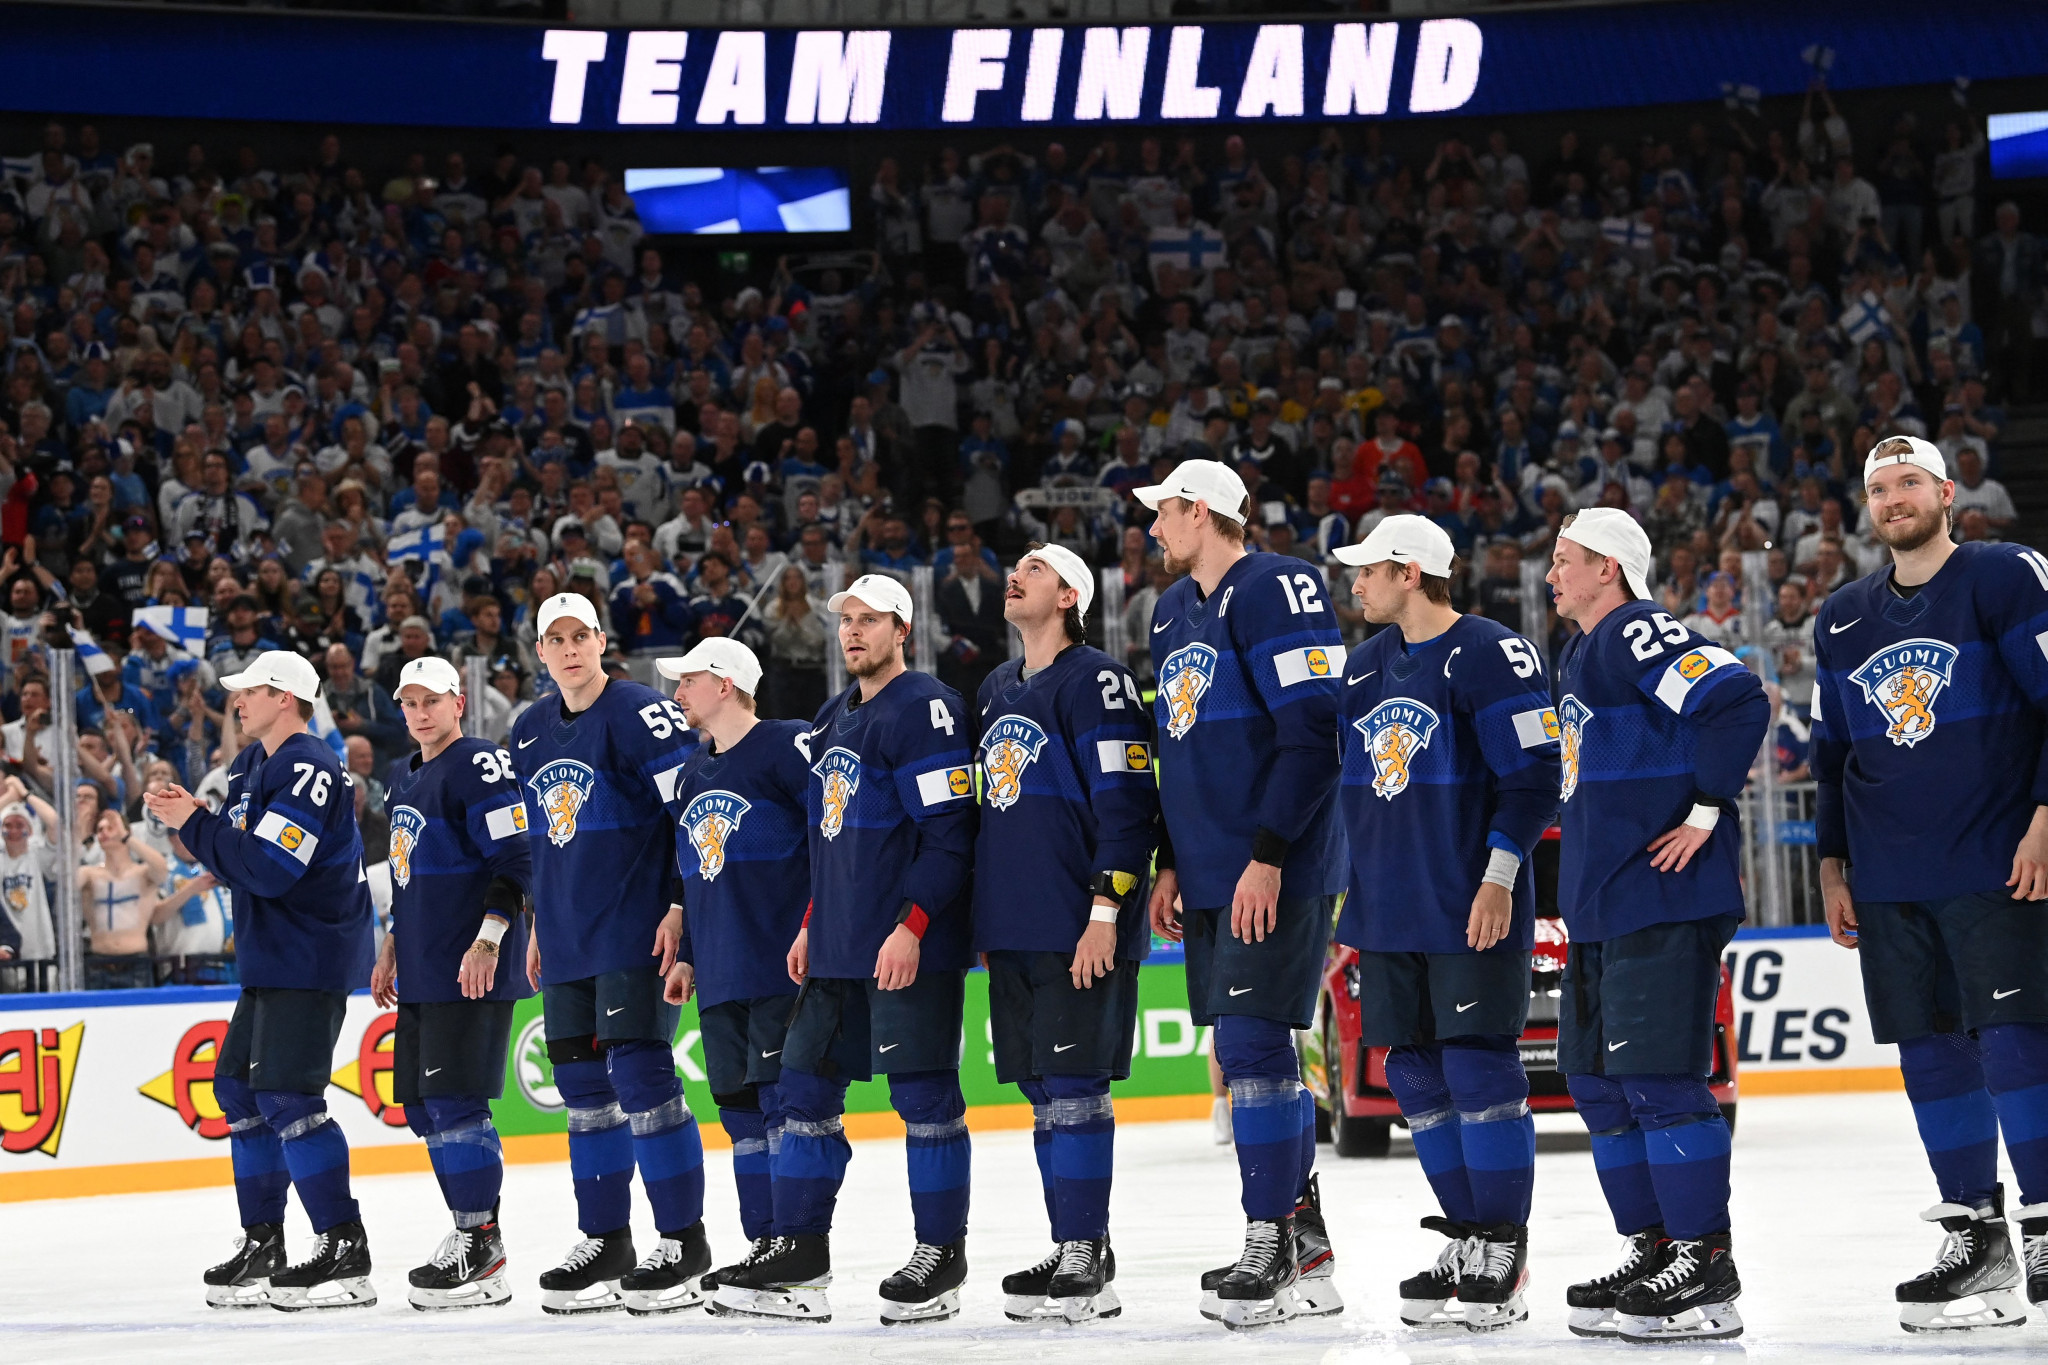 Holders Finland bounced back from their opening day defeat to beat Germany 4-3 at the Ice Hockey World Championship ©Getty Images  